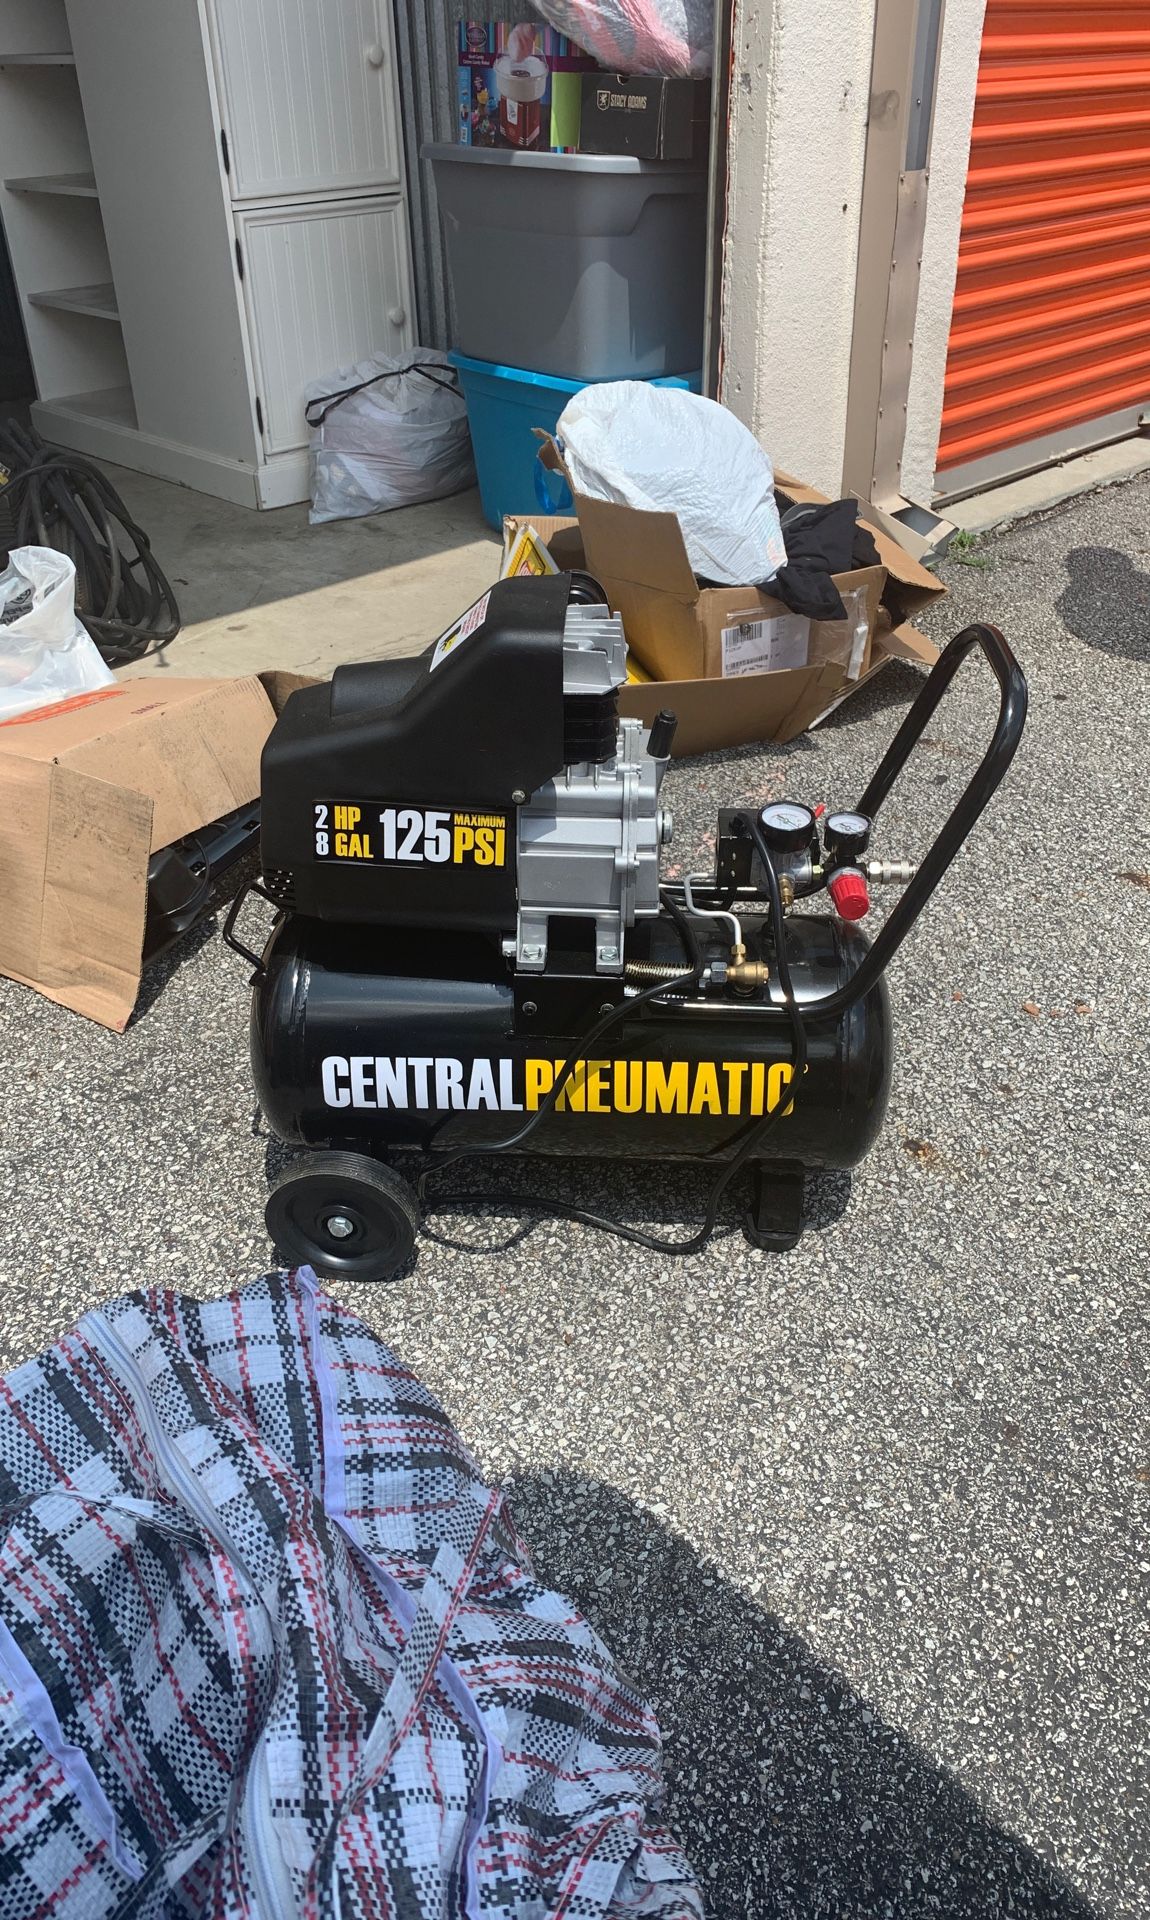 Brand new 2 hp 8 gallon 125 psi air compressor $200 or best offer